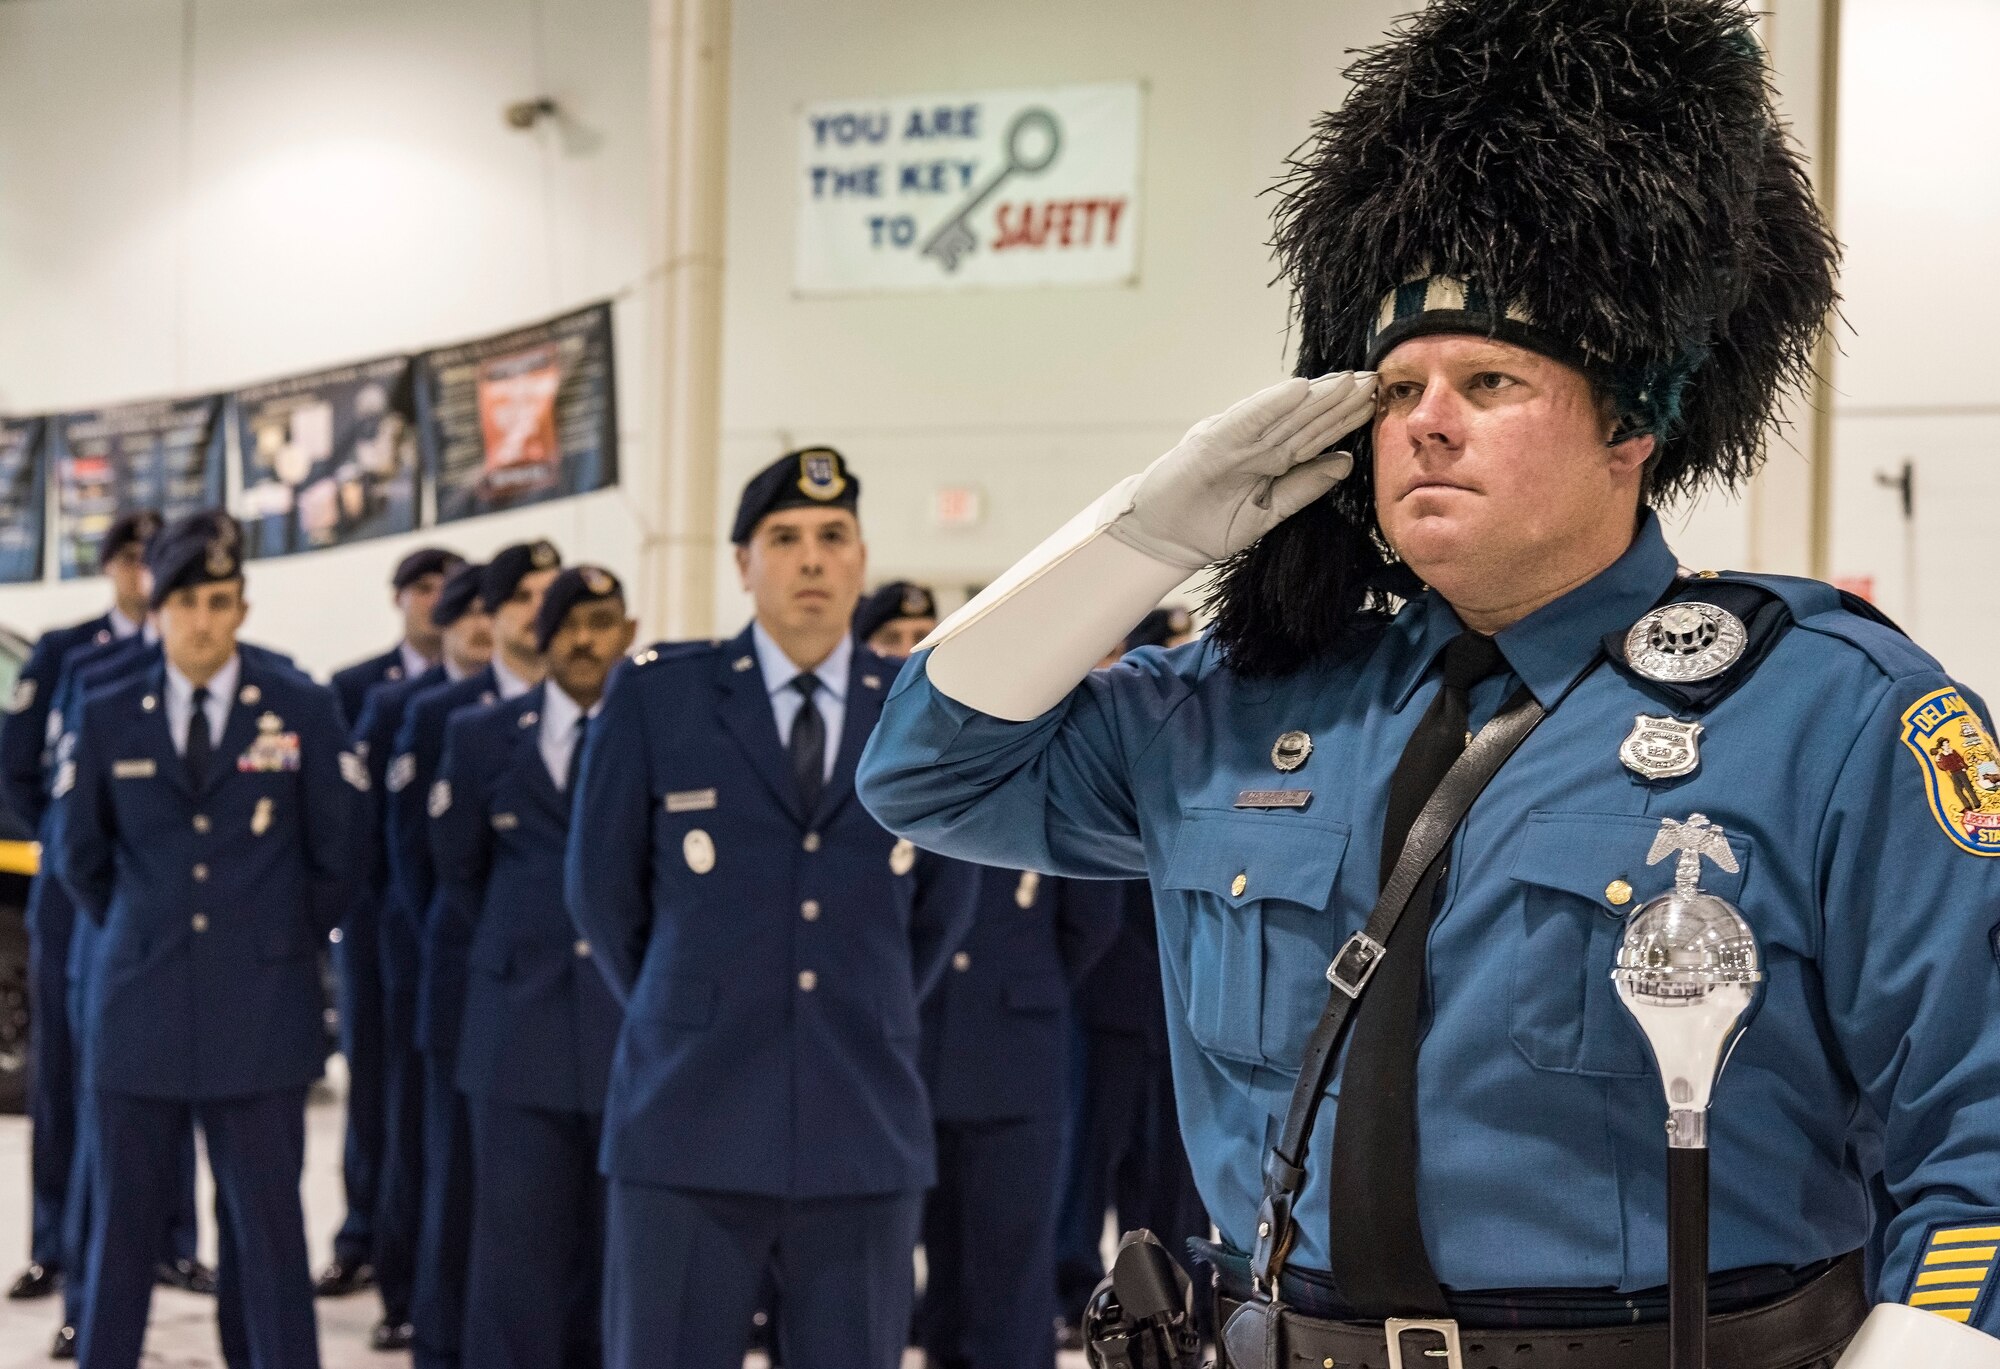 Sgt. Dan Salfas, Delaware State Police Pipes and Drums band drum major, salutes 14 placards during the National Police Week Remembrance Ceremony, May 18, 2018, at Dover Air Force Base, Del. The placards were displayed in honor of Air Force security forces members who died in the line of duty since 2005. The ceremony also recognized 12 Air Force Office of Special Investigation agents who made the ultimate sacrifice in defense of the country. (U.S. Air Force photo by Roland Balik)